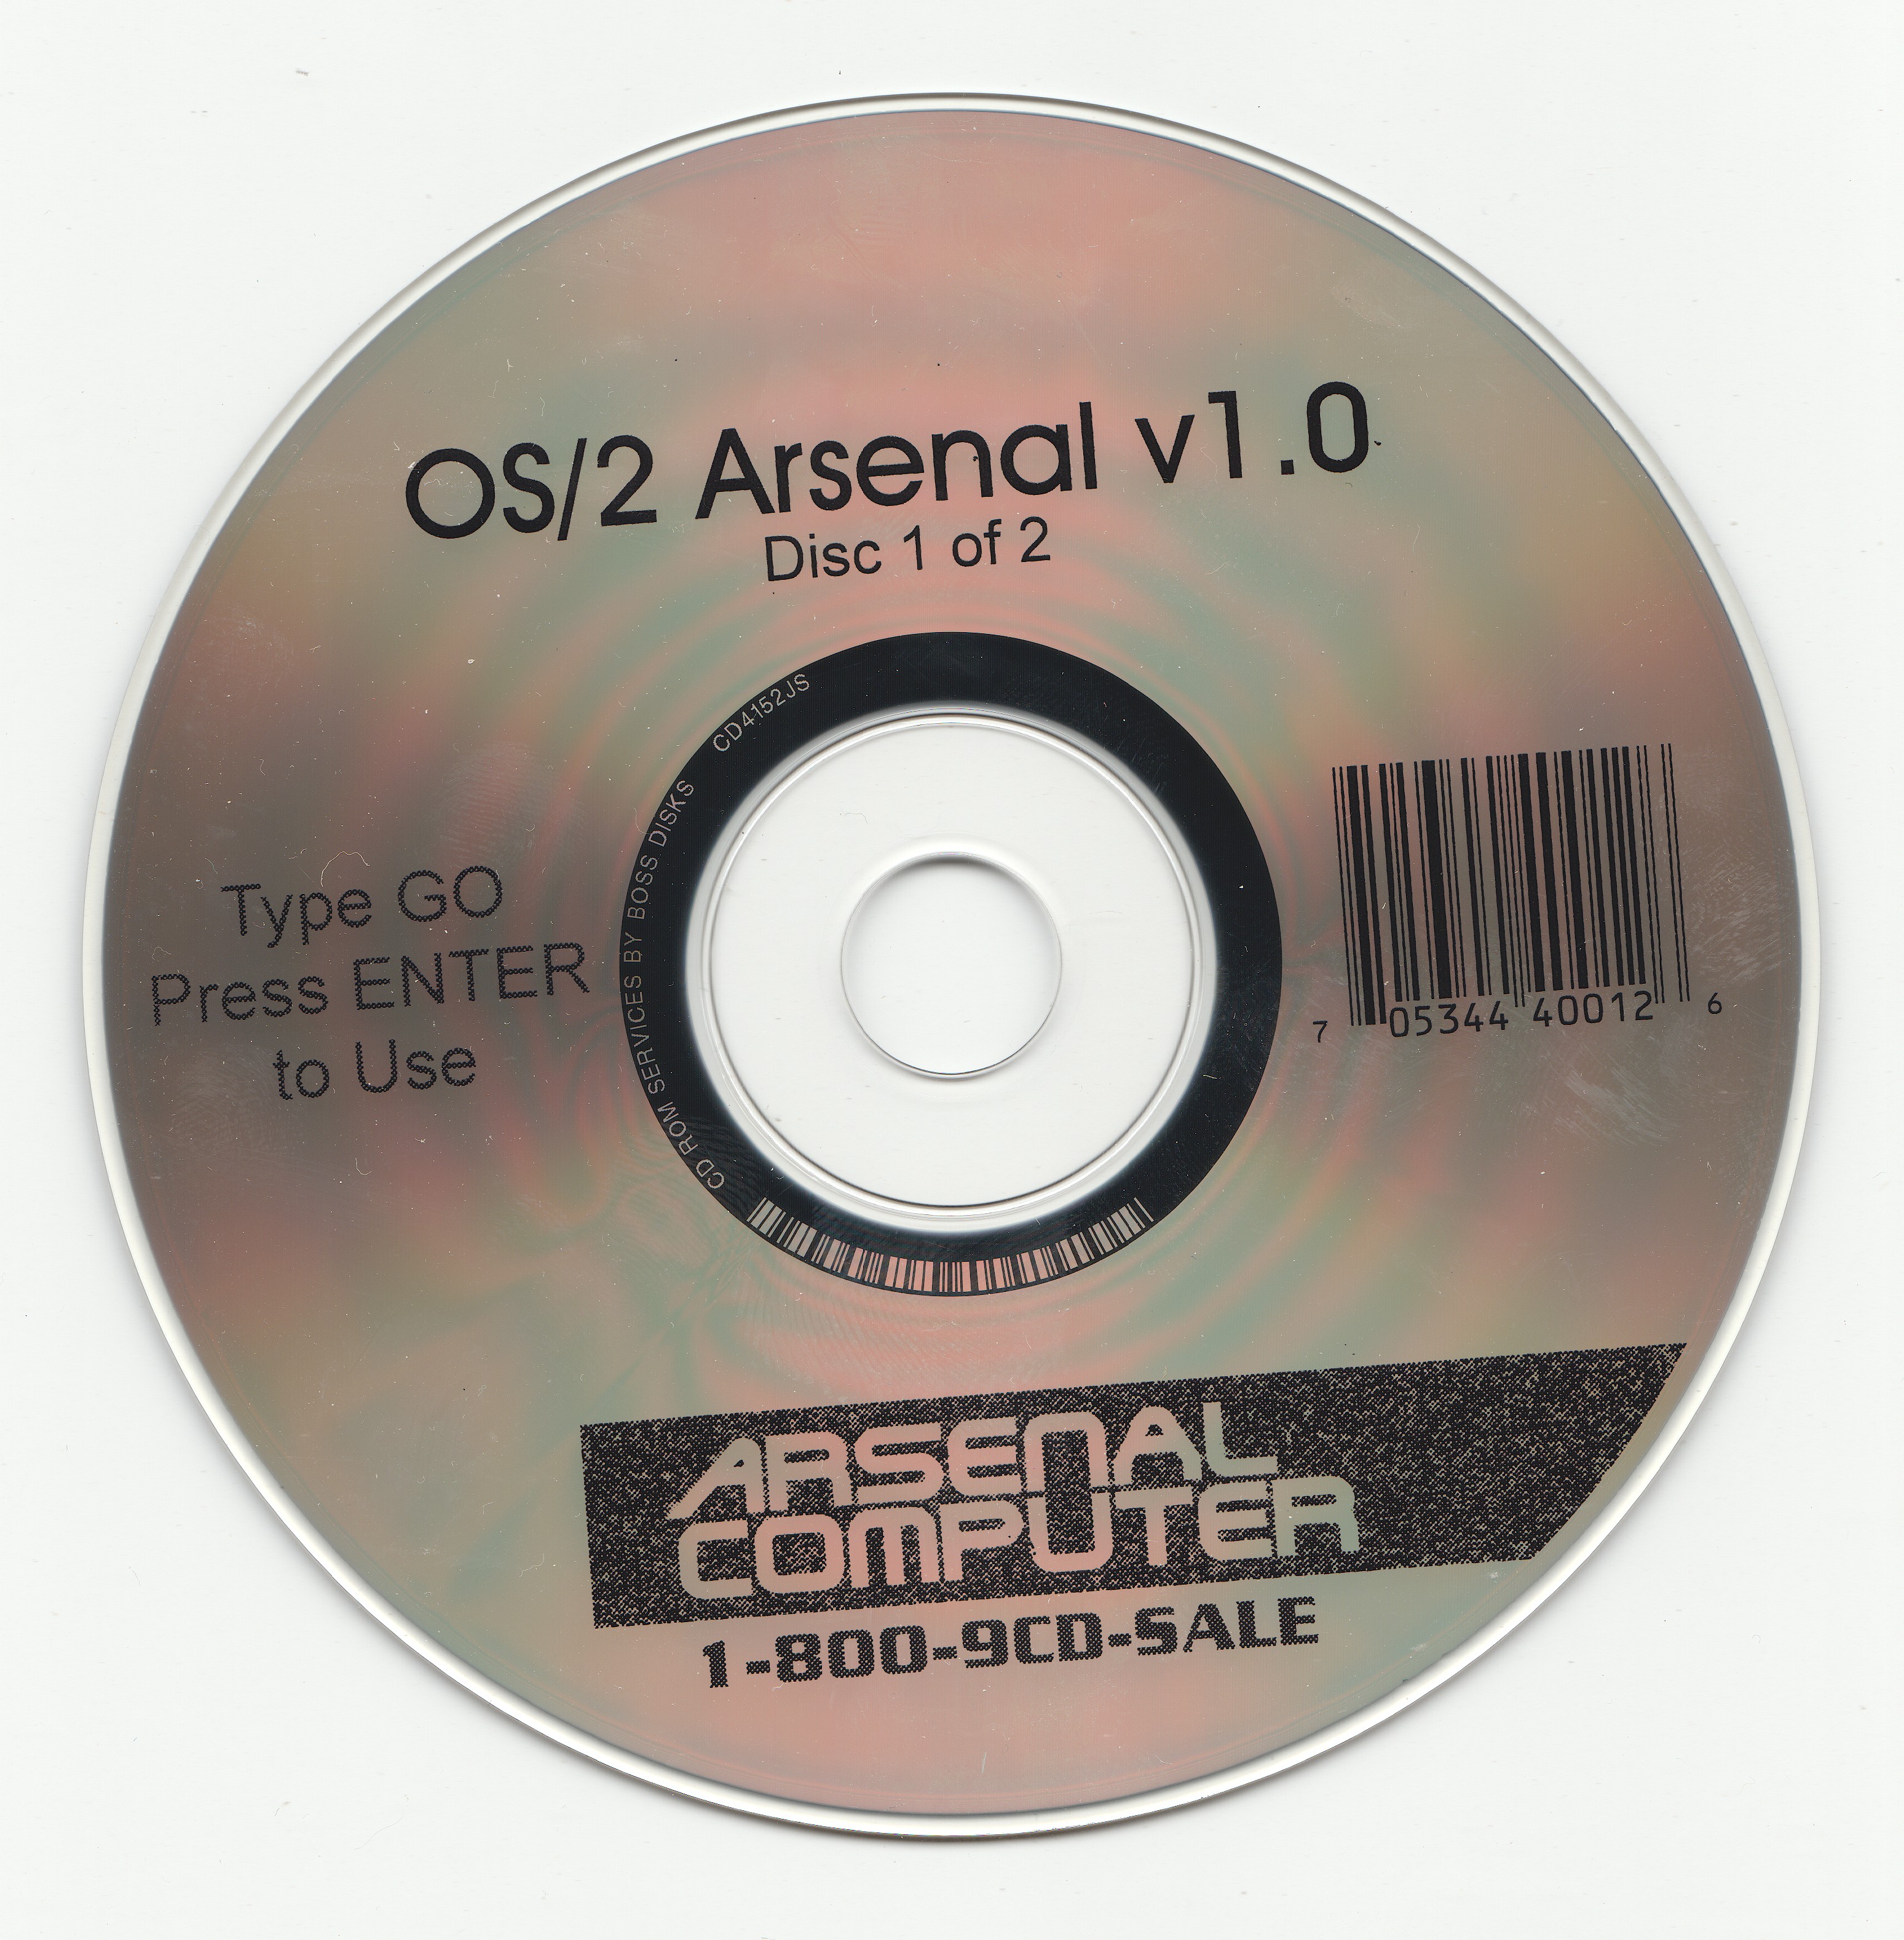 OS2 Arsenal v1.0 (Disc 1)(Arsenal Computer) Free Download, Borrow, and Streaming Internet Archive